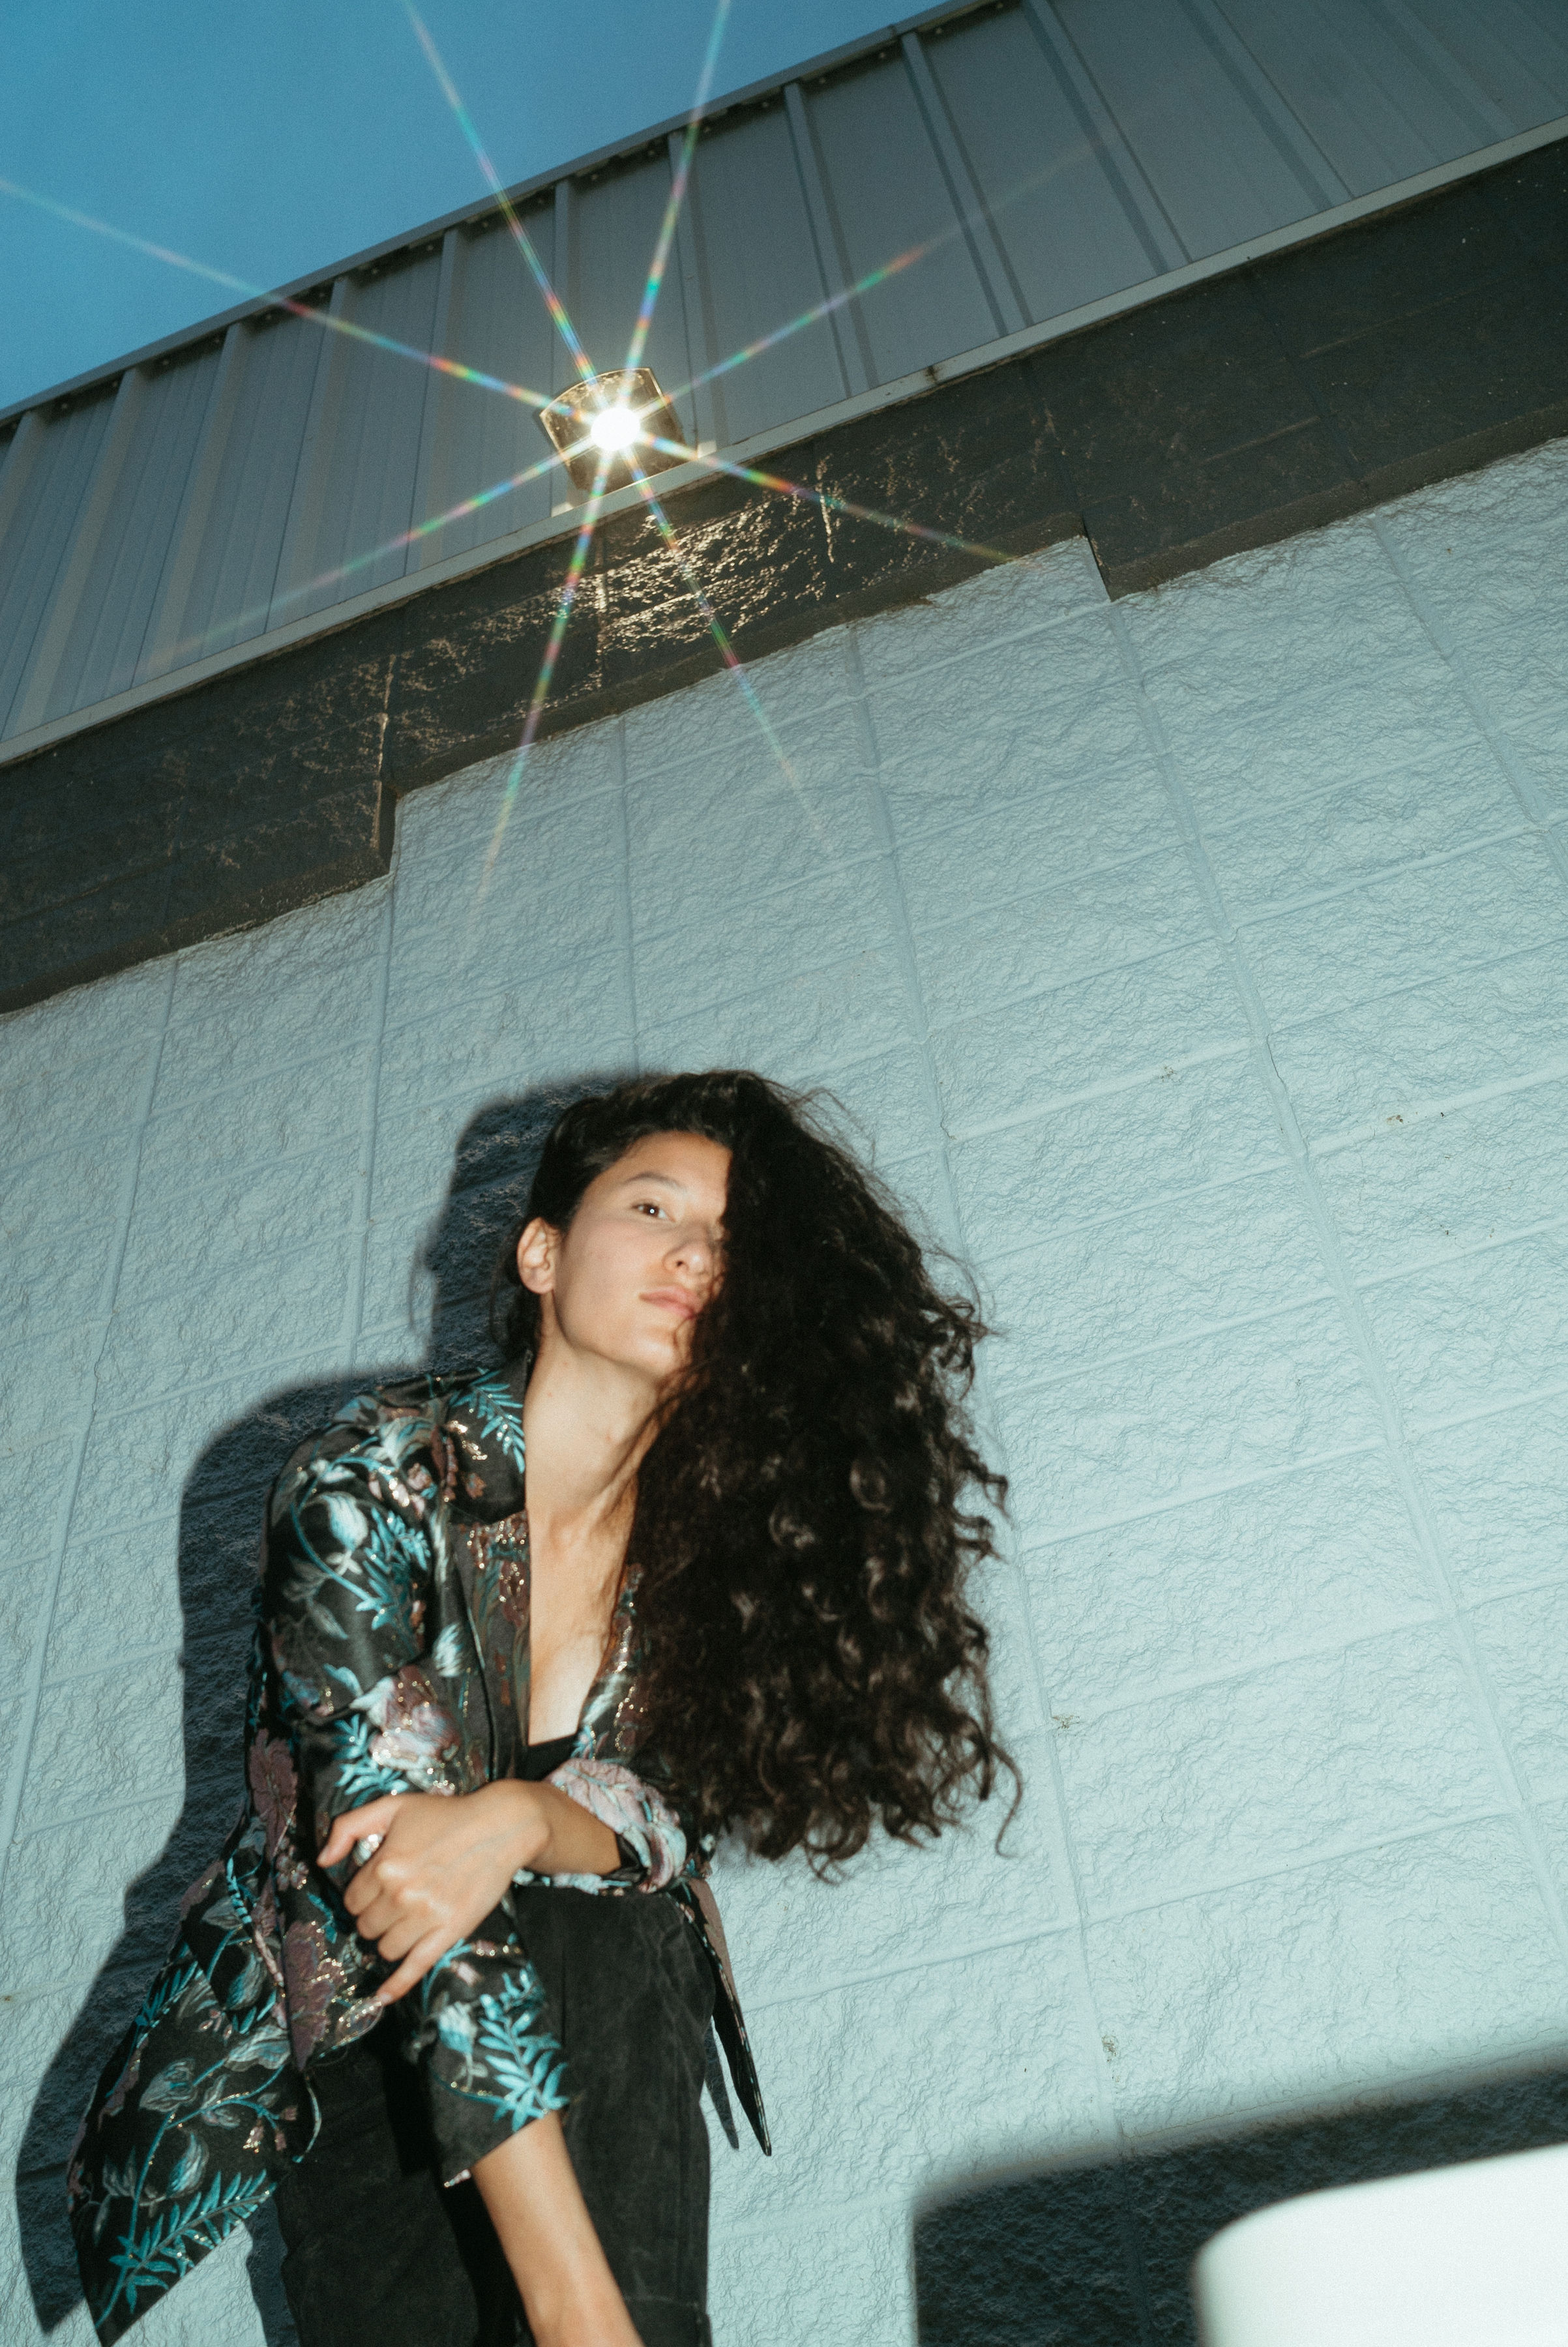 [Image description: Photo of ZEMBU standing in front of an industrial white and gray wall. A small light is above her casting a starburst light reflection. ZEMBU is wearing an amazing black blazer with teal and soft pink floral brocades. She has long, dark, curly hair.] 